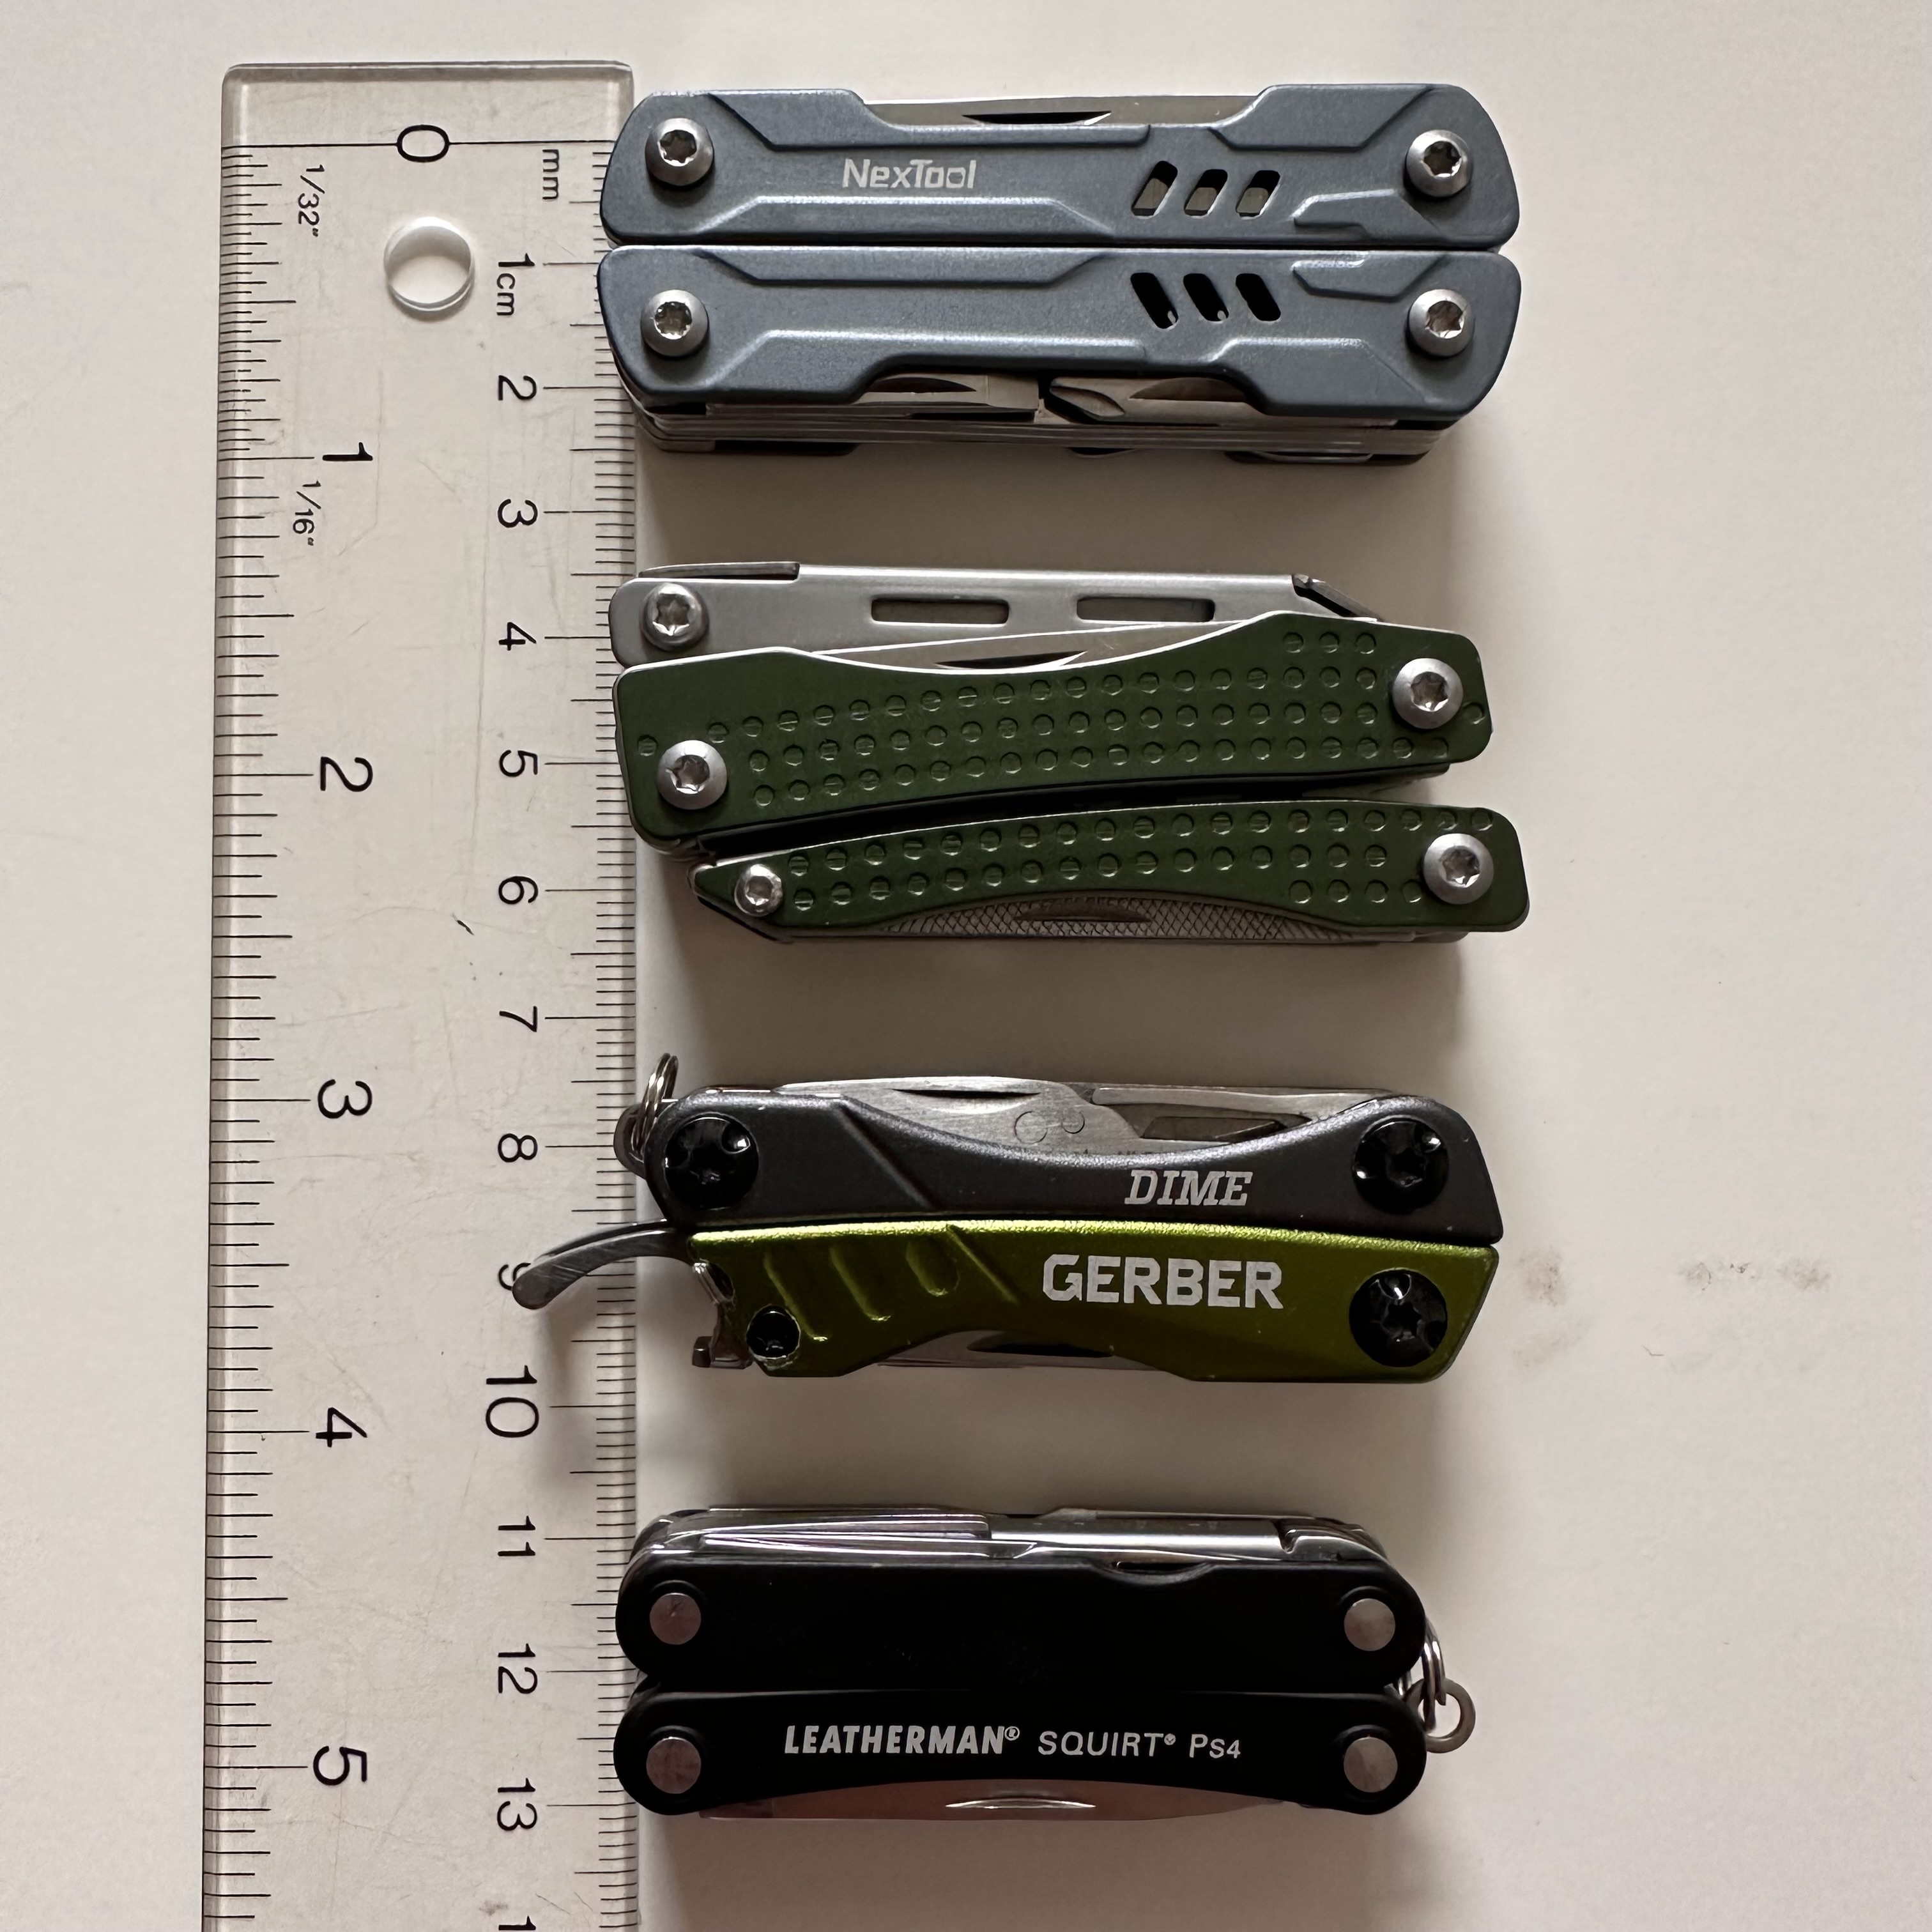 2022 Comparing the Gerber Dime, NexTool Mini, and Leatherman Squirt  Keychain Multi-tools